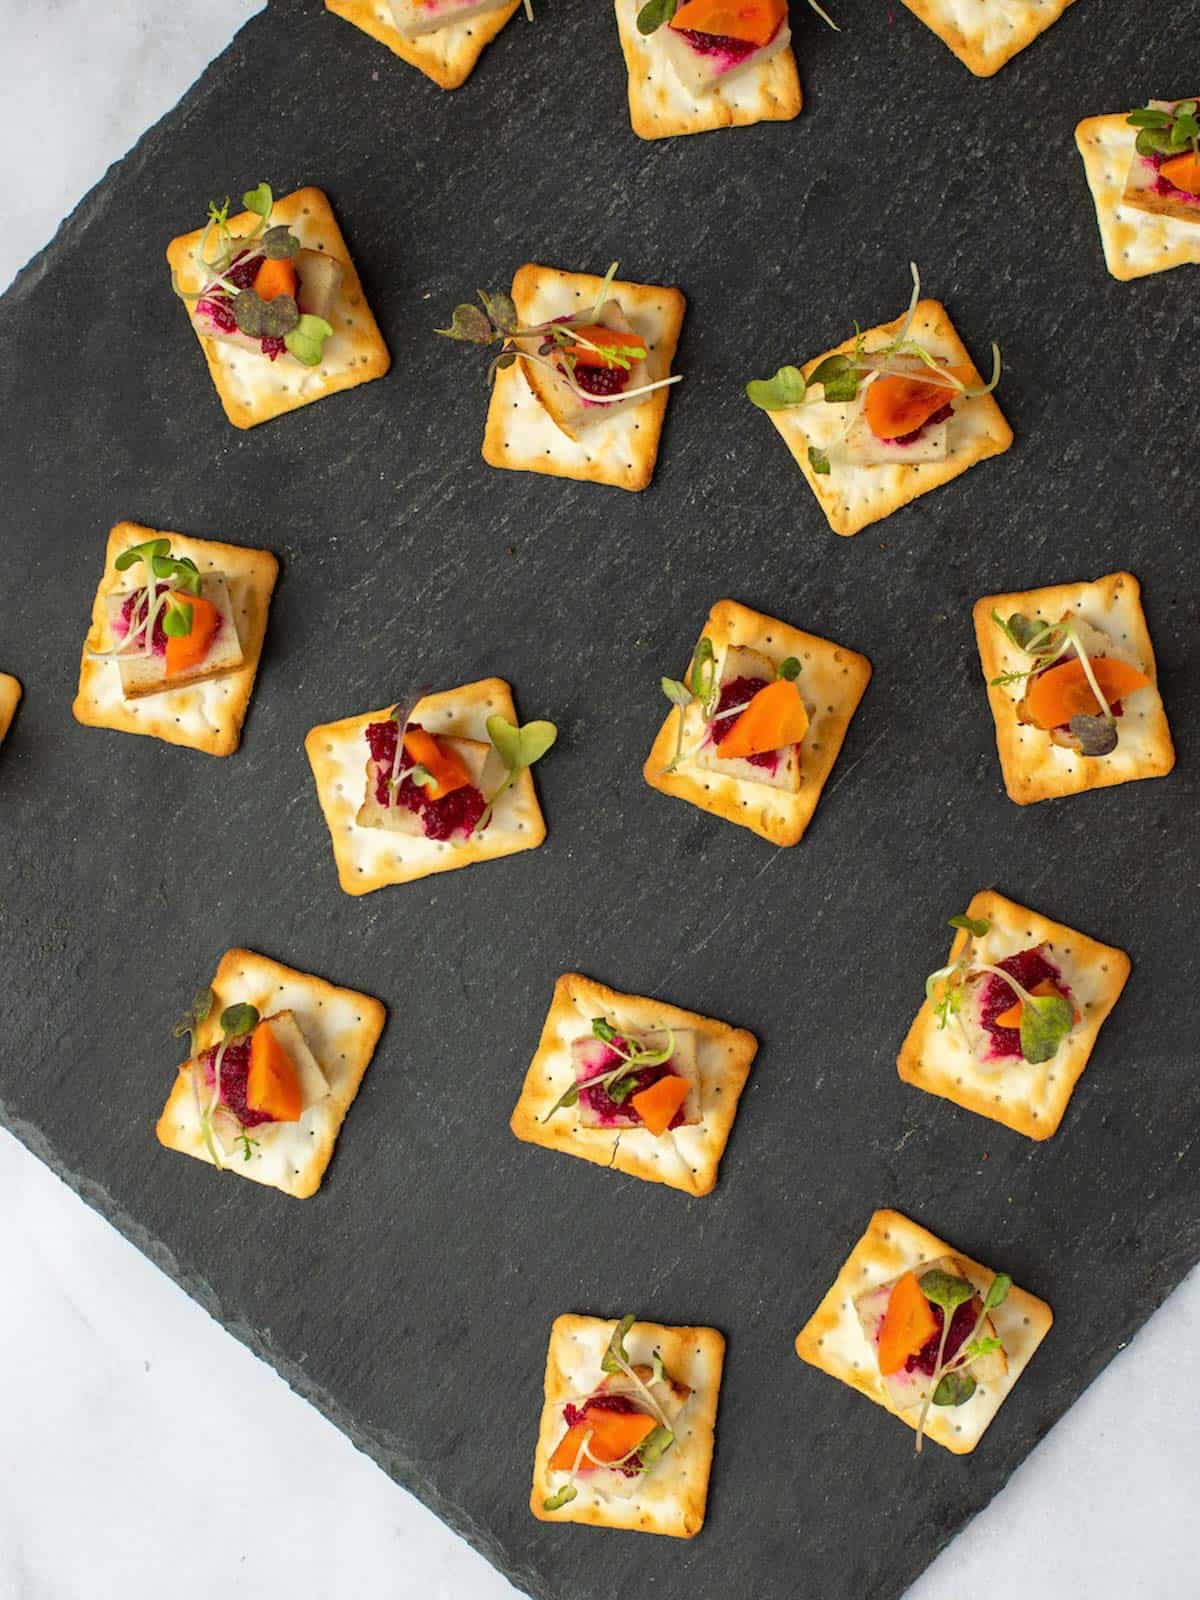 Baked gefilte fish on matzo crackers topped with beet horseradish, microgreens, and carrots.